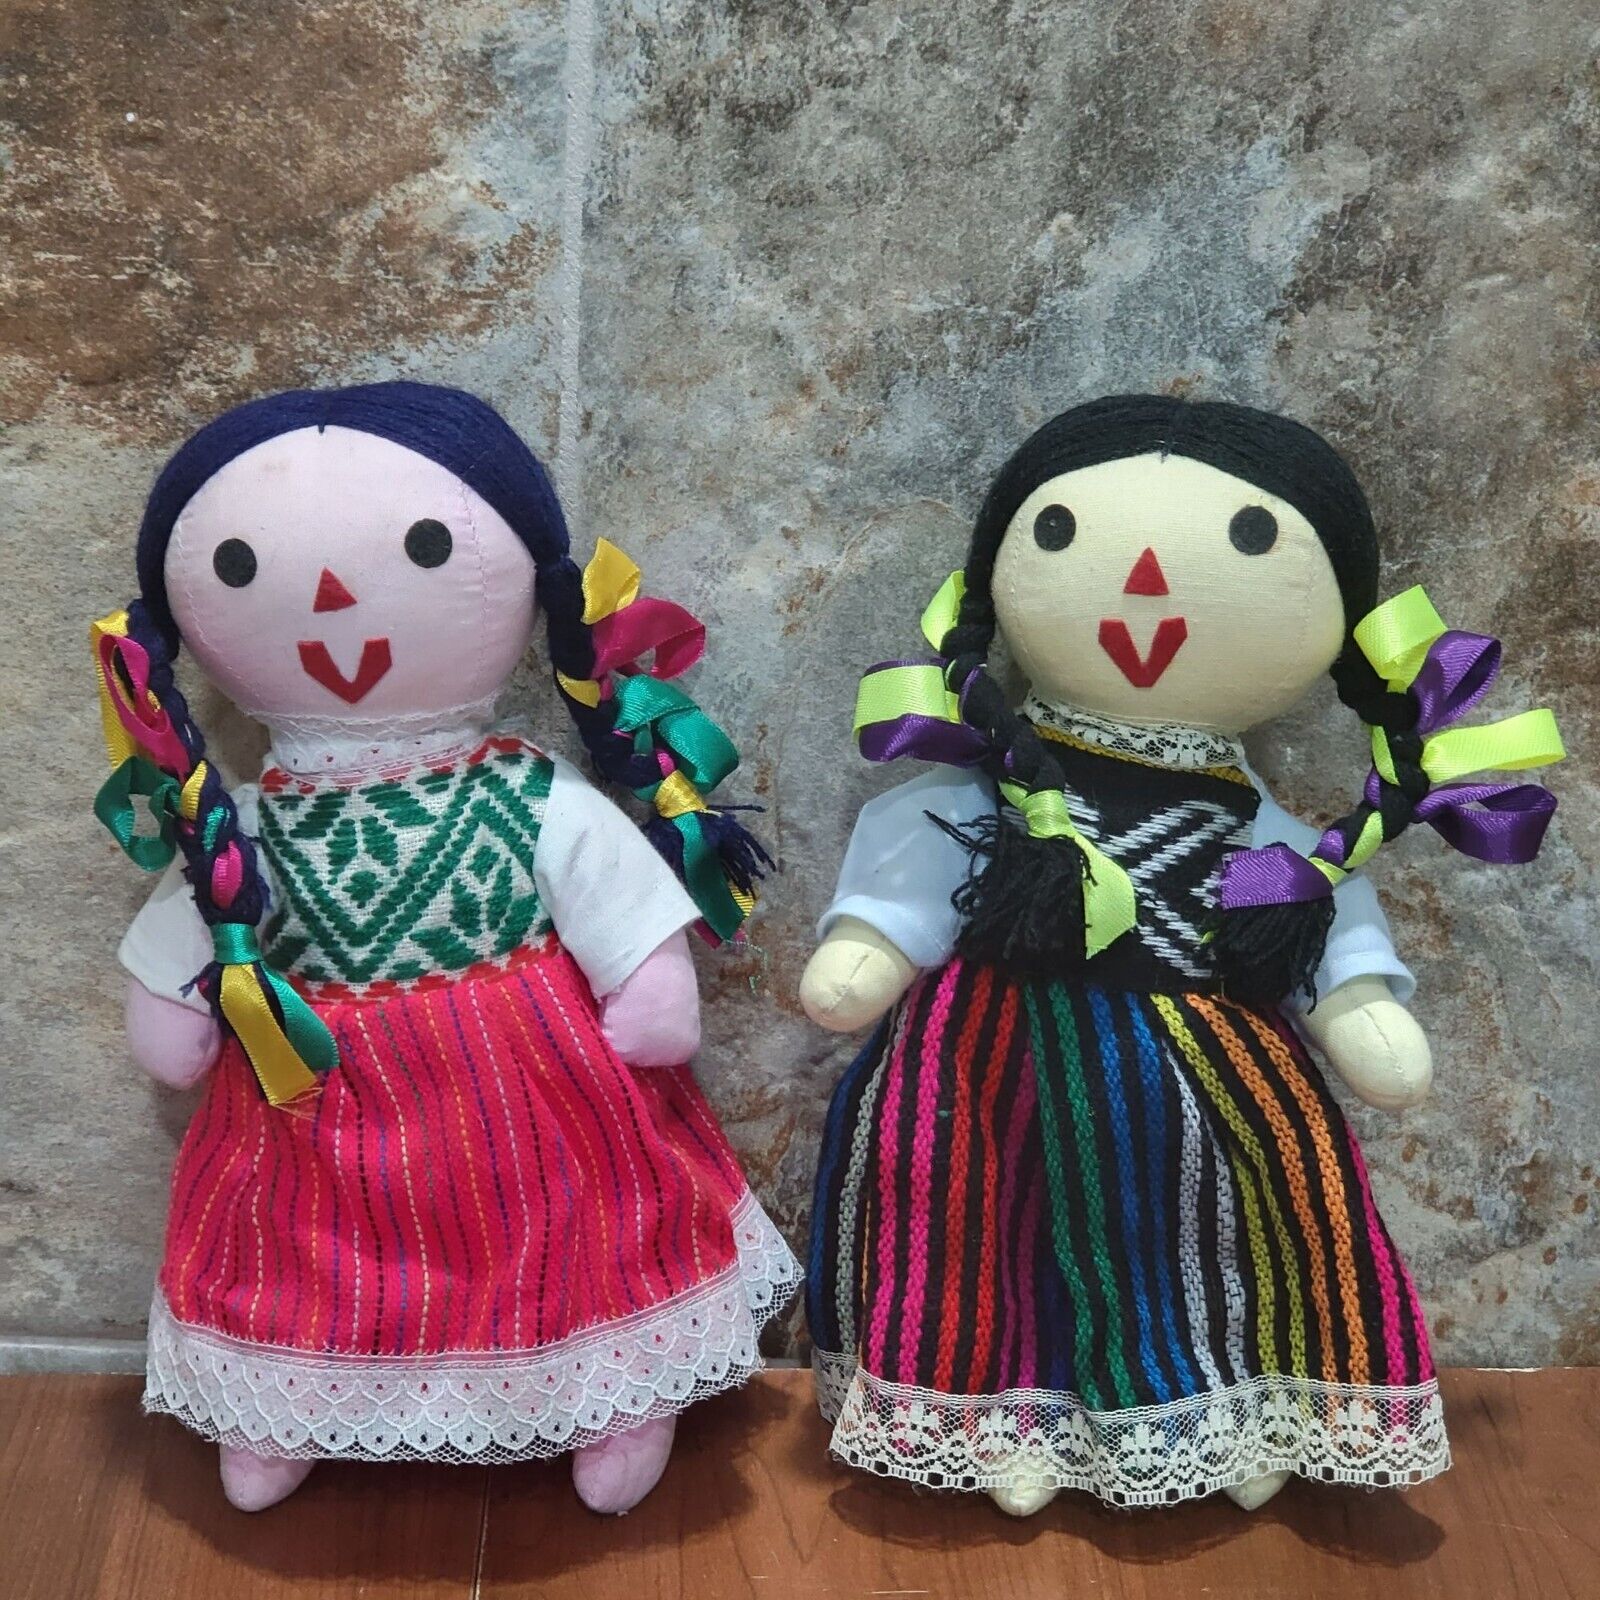 Vintage Handmade Mexican Folk Art Rag Doll Jointed Traditional Dress Colorful